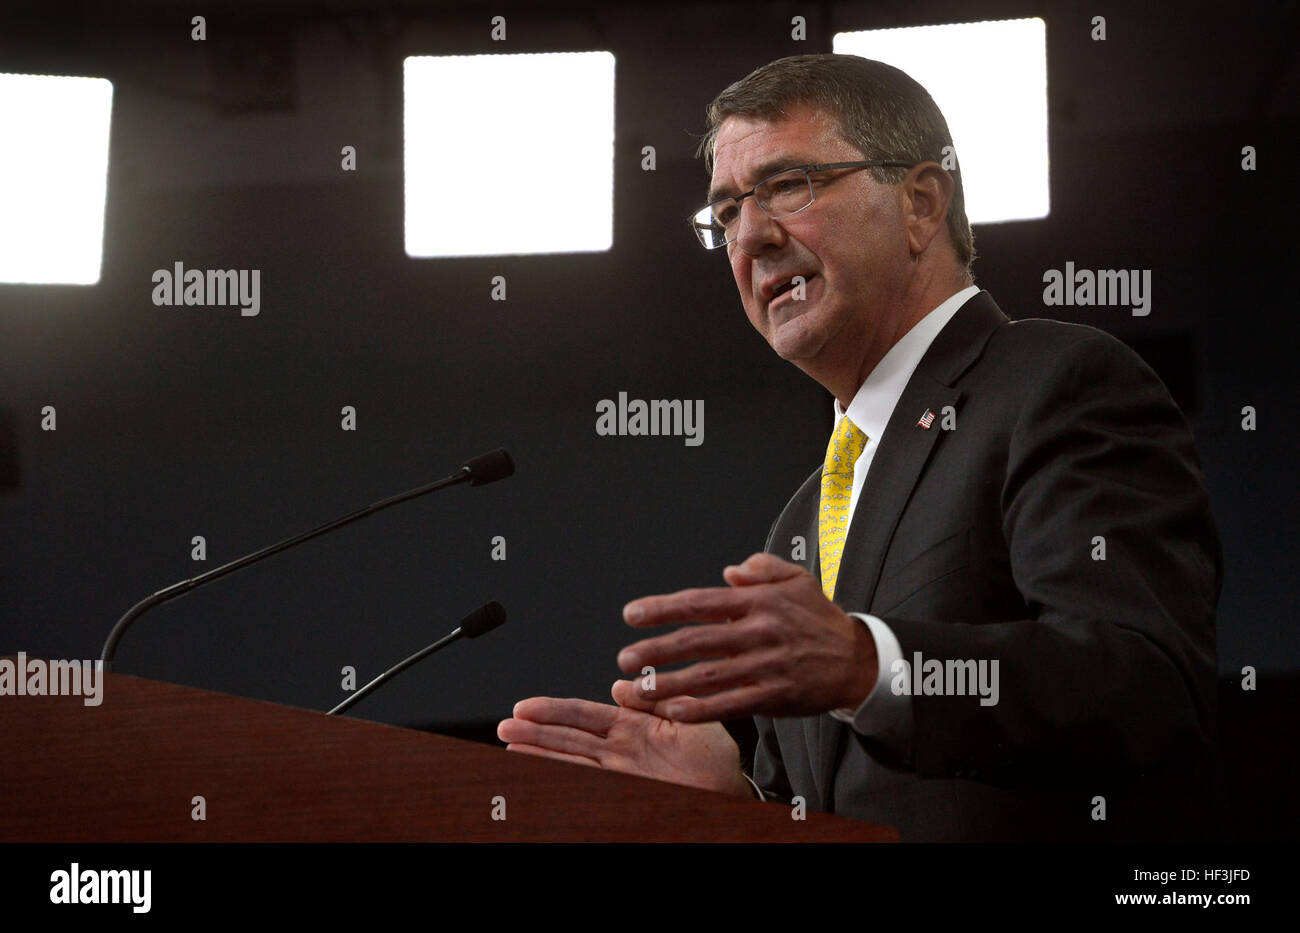 Secretary of Defense Ash Carter conducts a press briefing at the Pentagon Aug. 20, 2015. Carter answered questions from the media on a variety of issues including regional threats across the globe and potential logjams in Congress over the budget this fall. Carter also pointed out the recent graduation of the first two female soldiers of Army Ranger School, a significant milestone in DoD's plan to test the integration of women in combatant roles. (DoD Photo by Glenn Fawcett/Released) Defense secretary congratulates first female graduates of US Army Ranger School 150820-D-NI589-265 Stock Photo